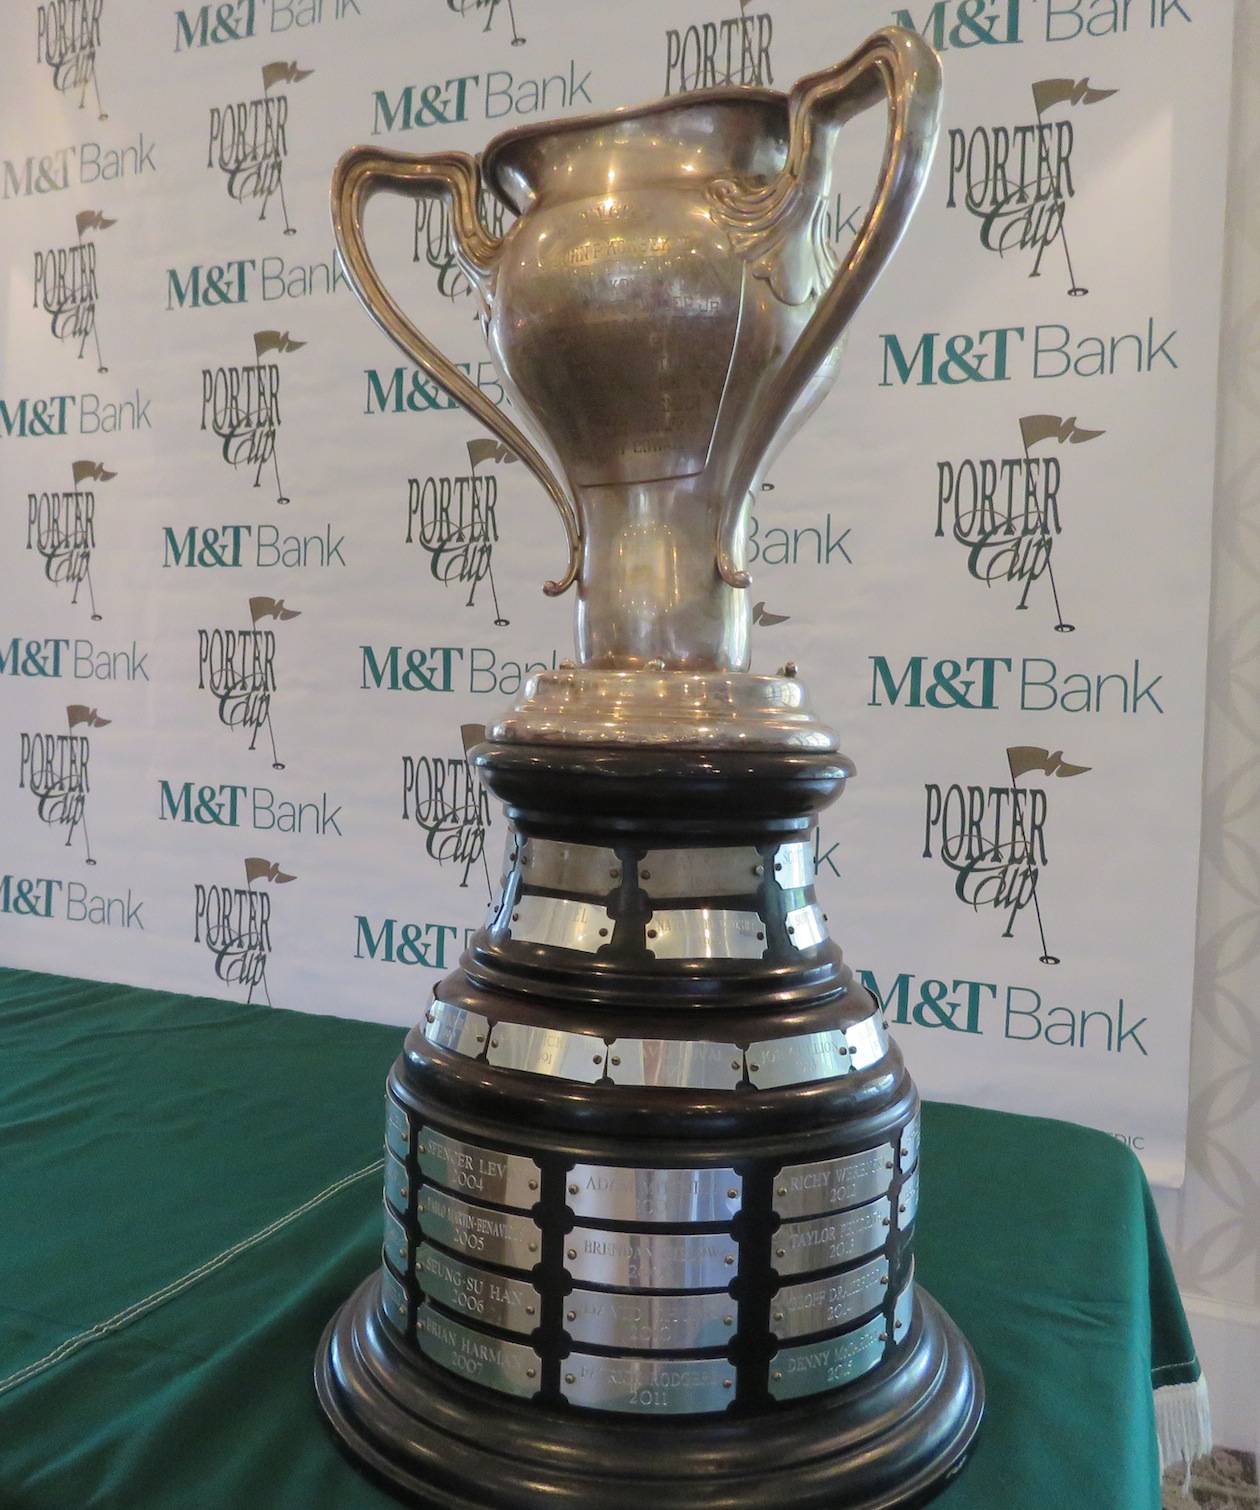 The Porter Cup trophy sits during Tuesday's conference.